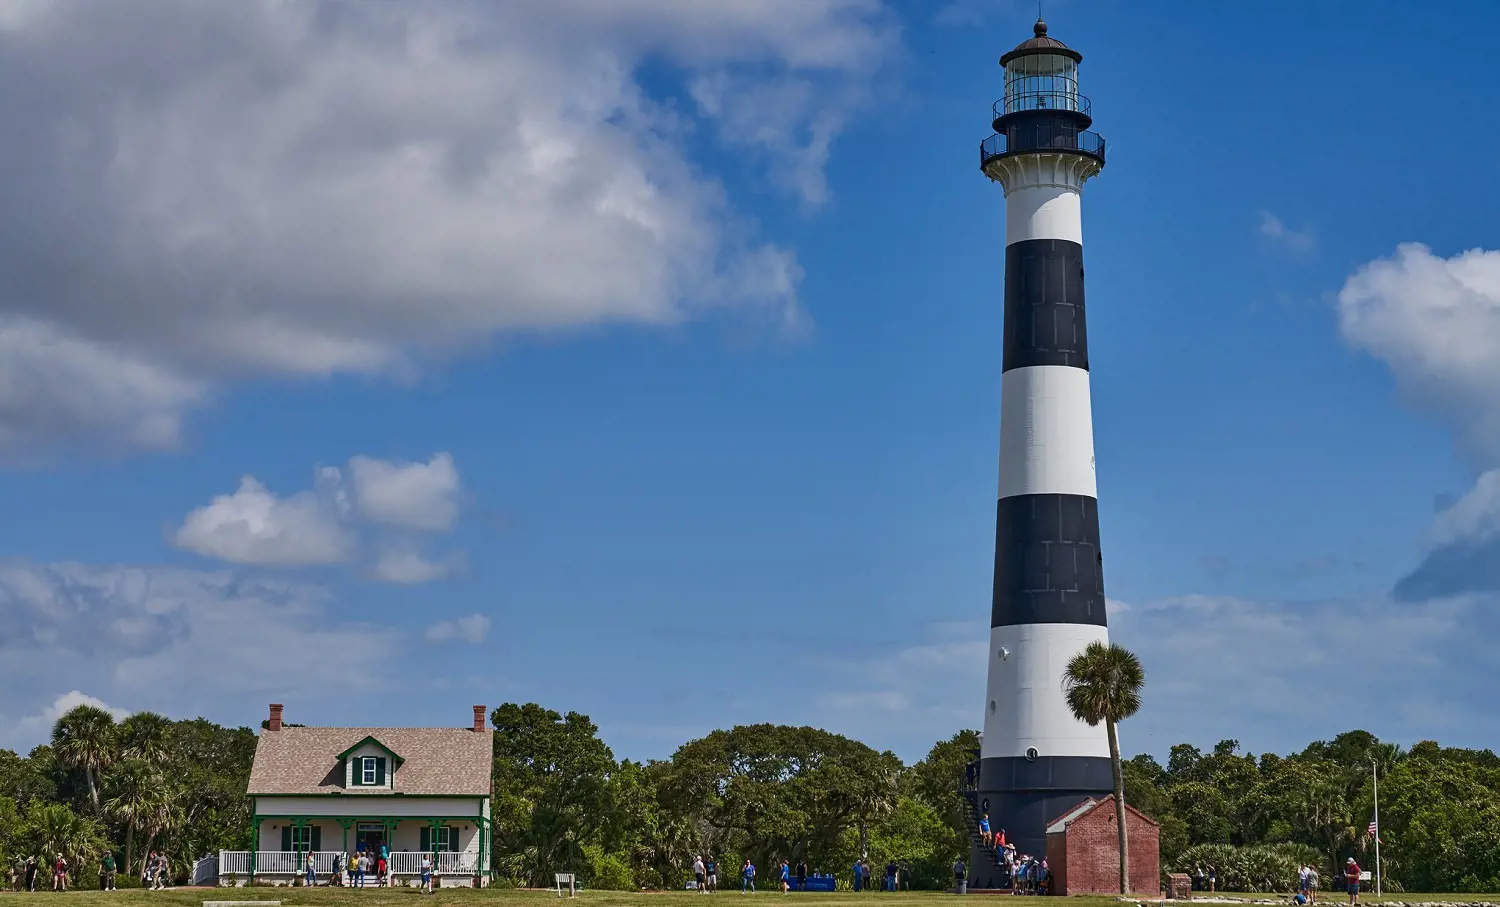 Cape Canaveral Lighthouse was was a 65 feet brick tower completed in 1848